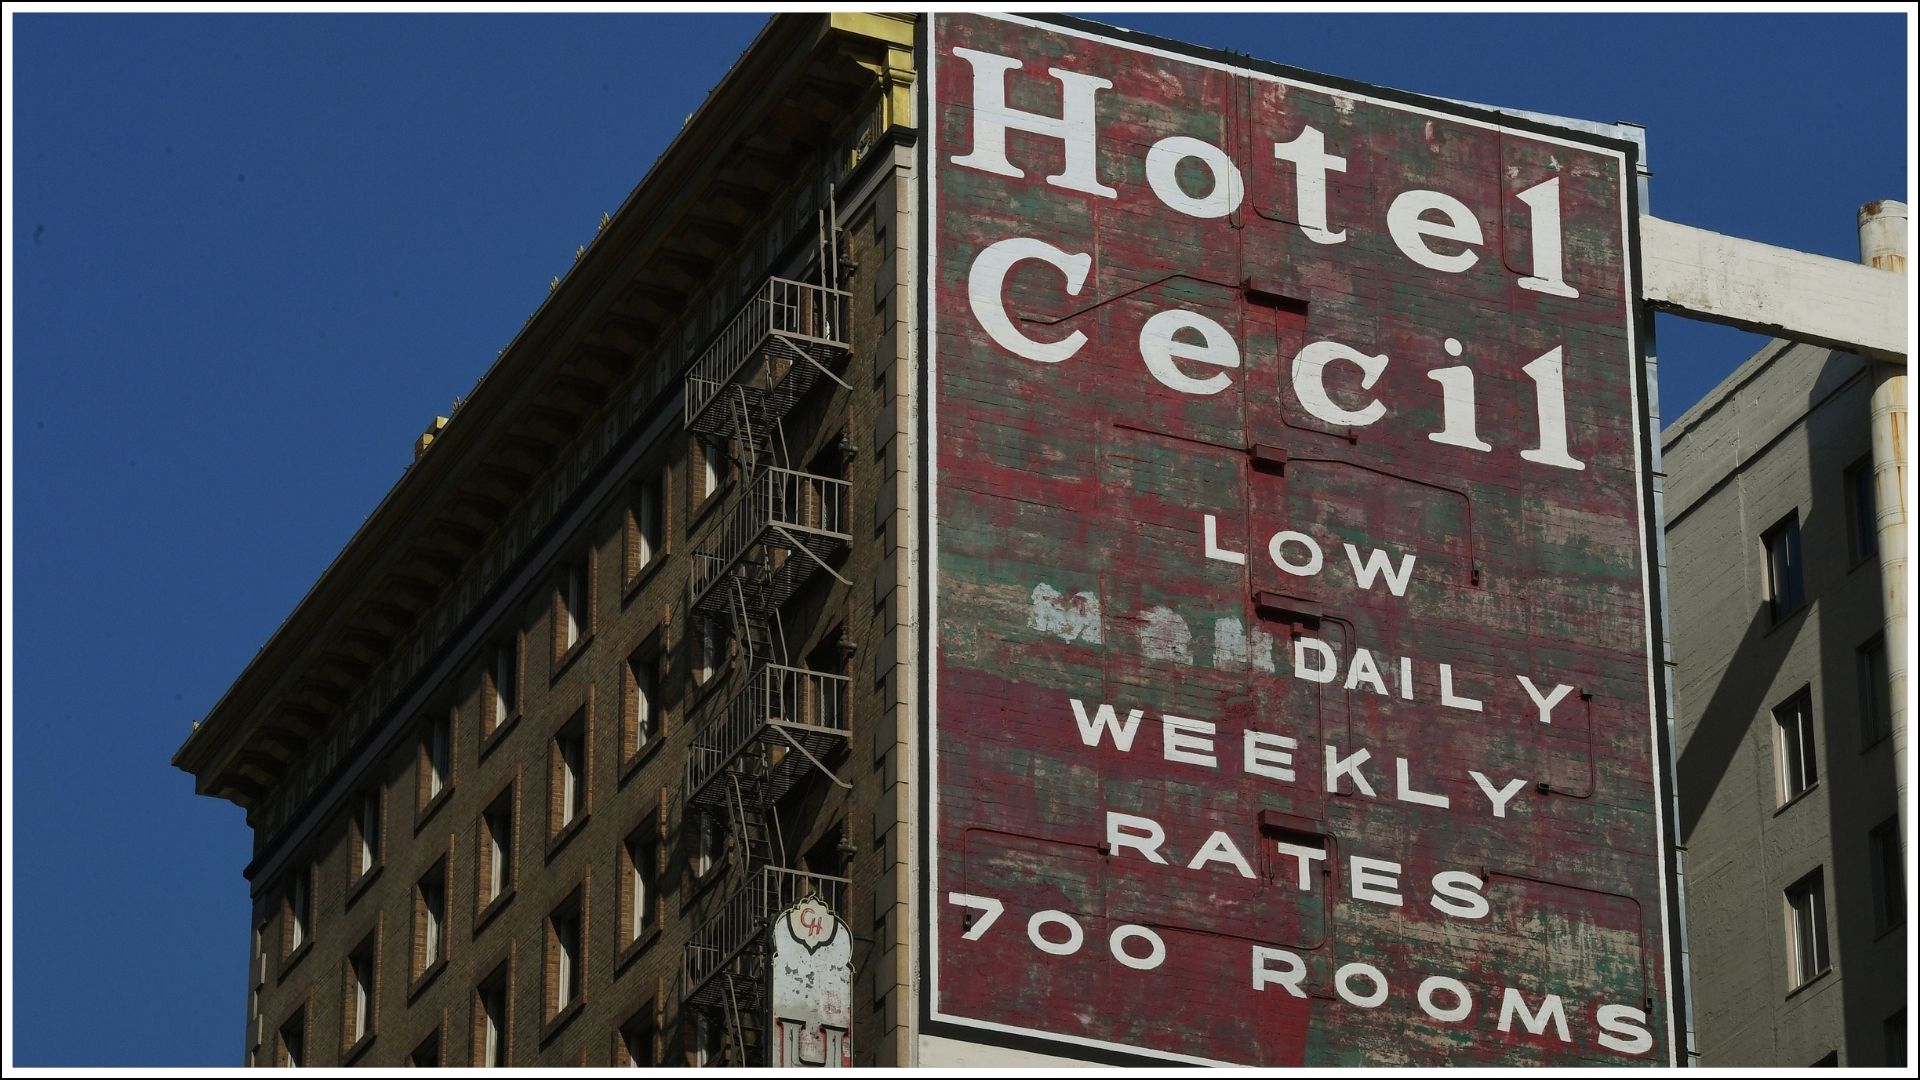 The infamous Hotel Cecil was named a historic-cultural monument by the City Council in a unanimous 10-0 vote in Los Angeles, California on February 28, 2017 The hotel, built in 1924, has been the scene of at least 15 murders and suicides as well as the temporary home of serial killers Richard Ramirez and Jack Unterweger. It's most recent tragedy was when 21-year-old Canadian Elisa Lam's naked body was found in the building's rooftop water tank after guests had complained about the taste of the water